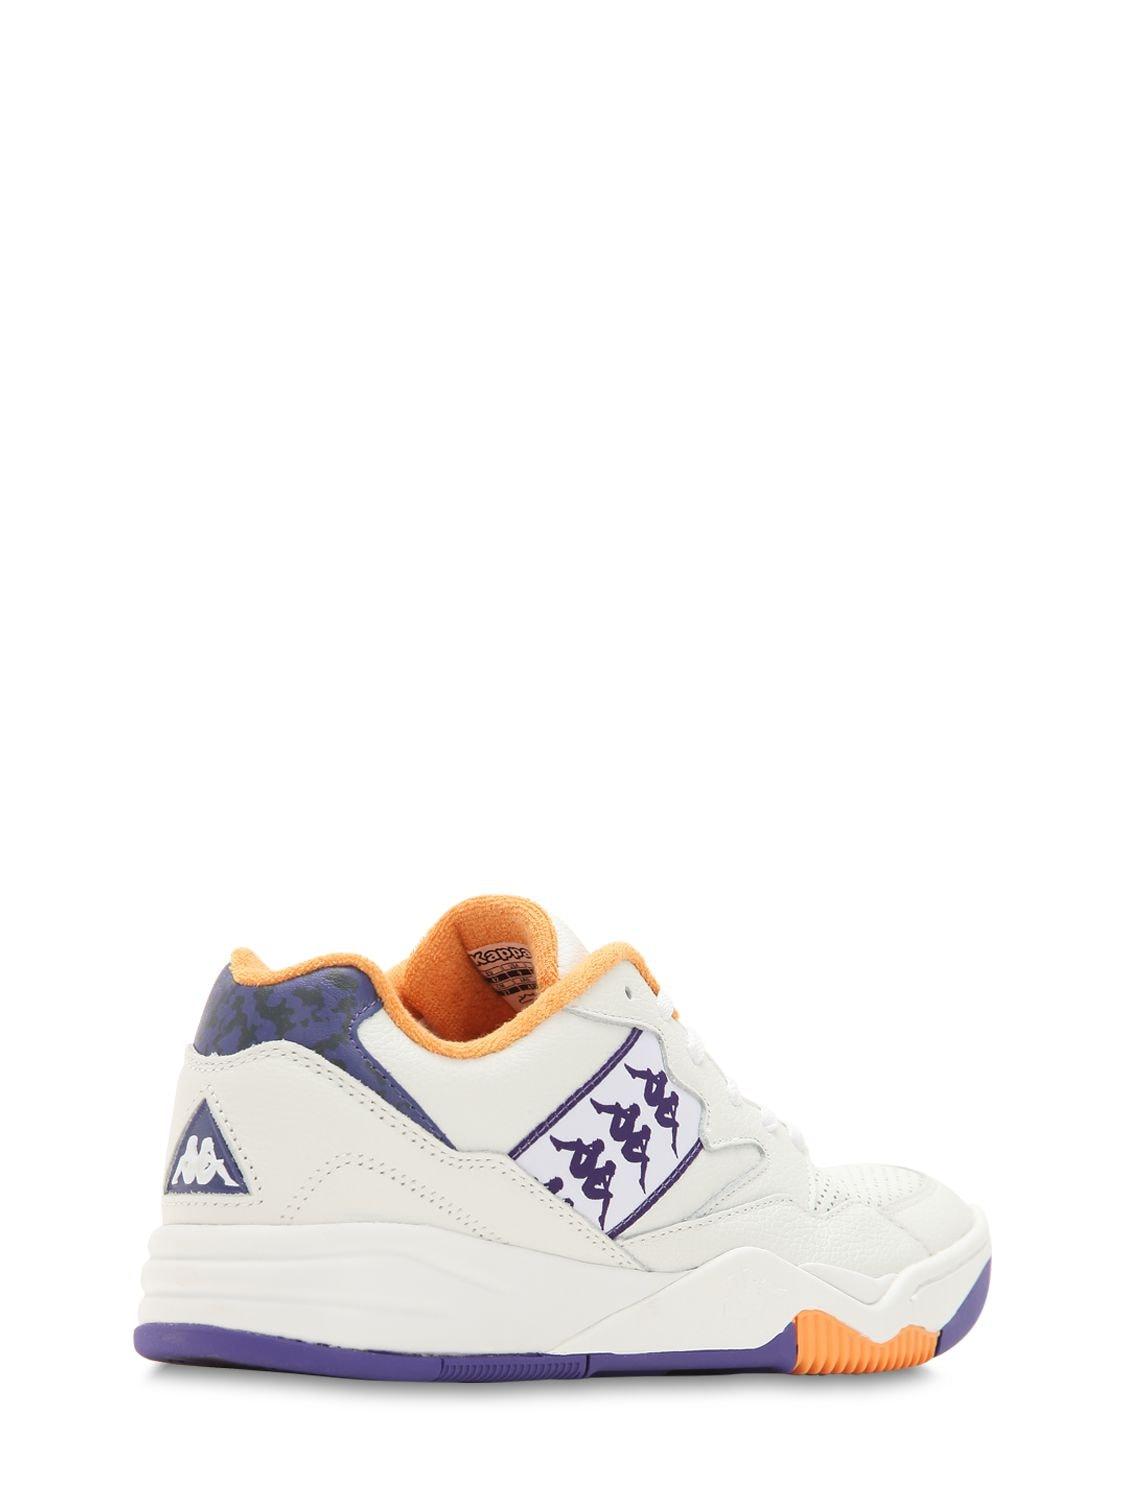 Kappa Leather Court Sneakers in White/Violet (White) for Men - Lyst